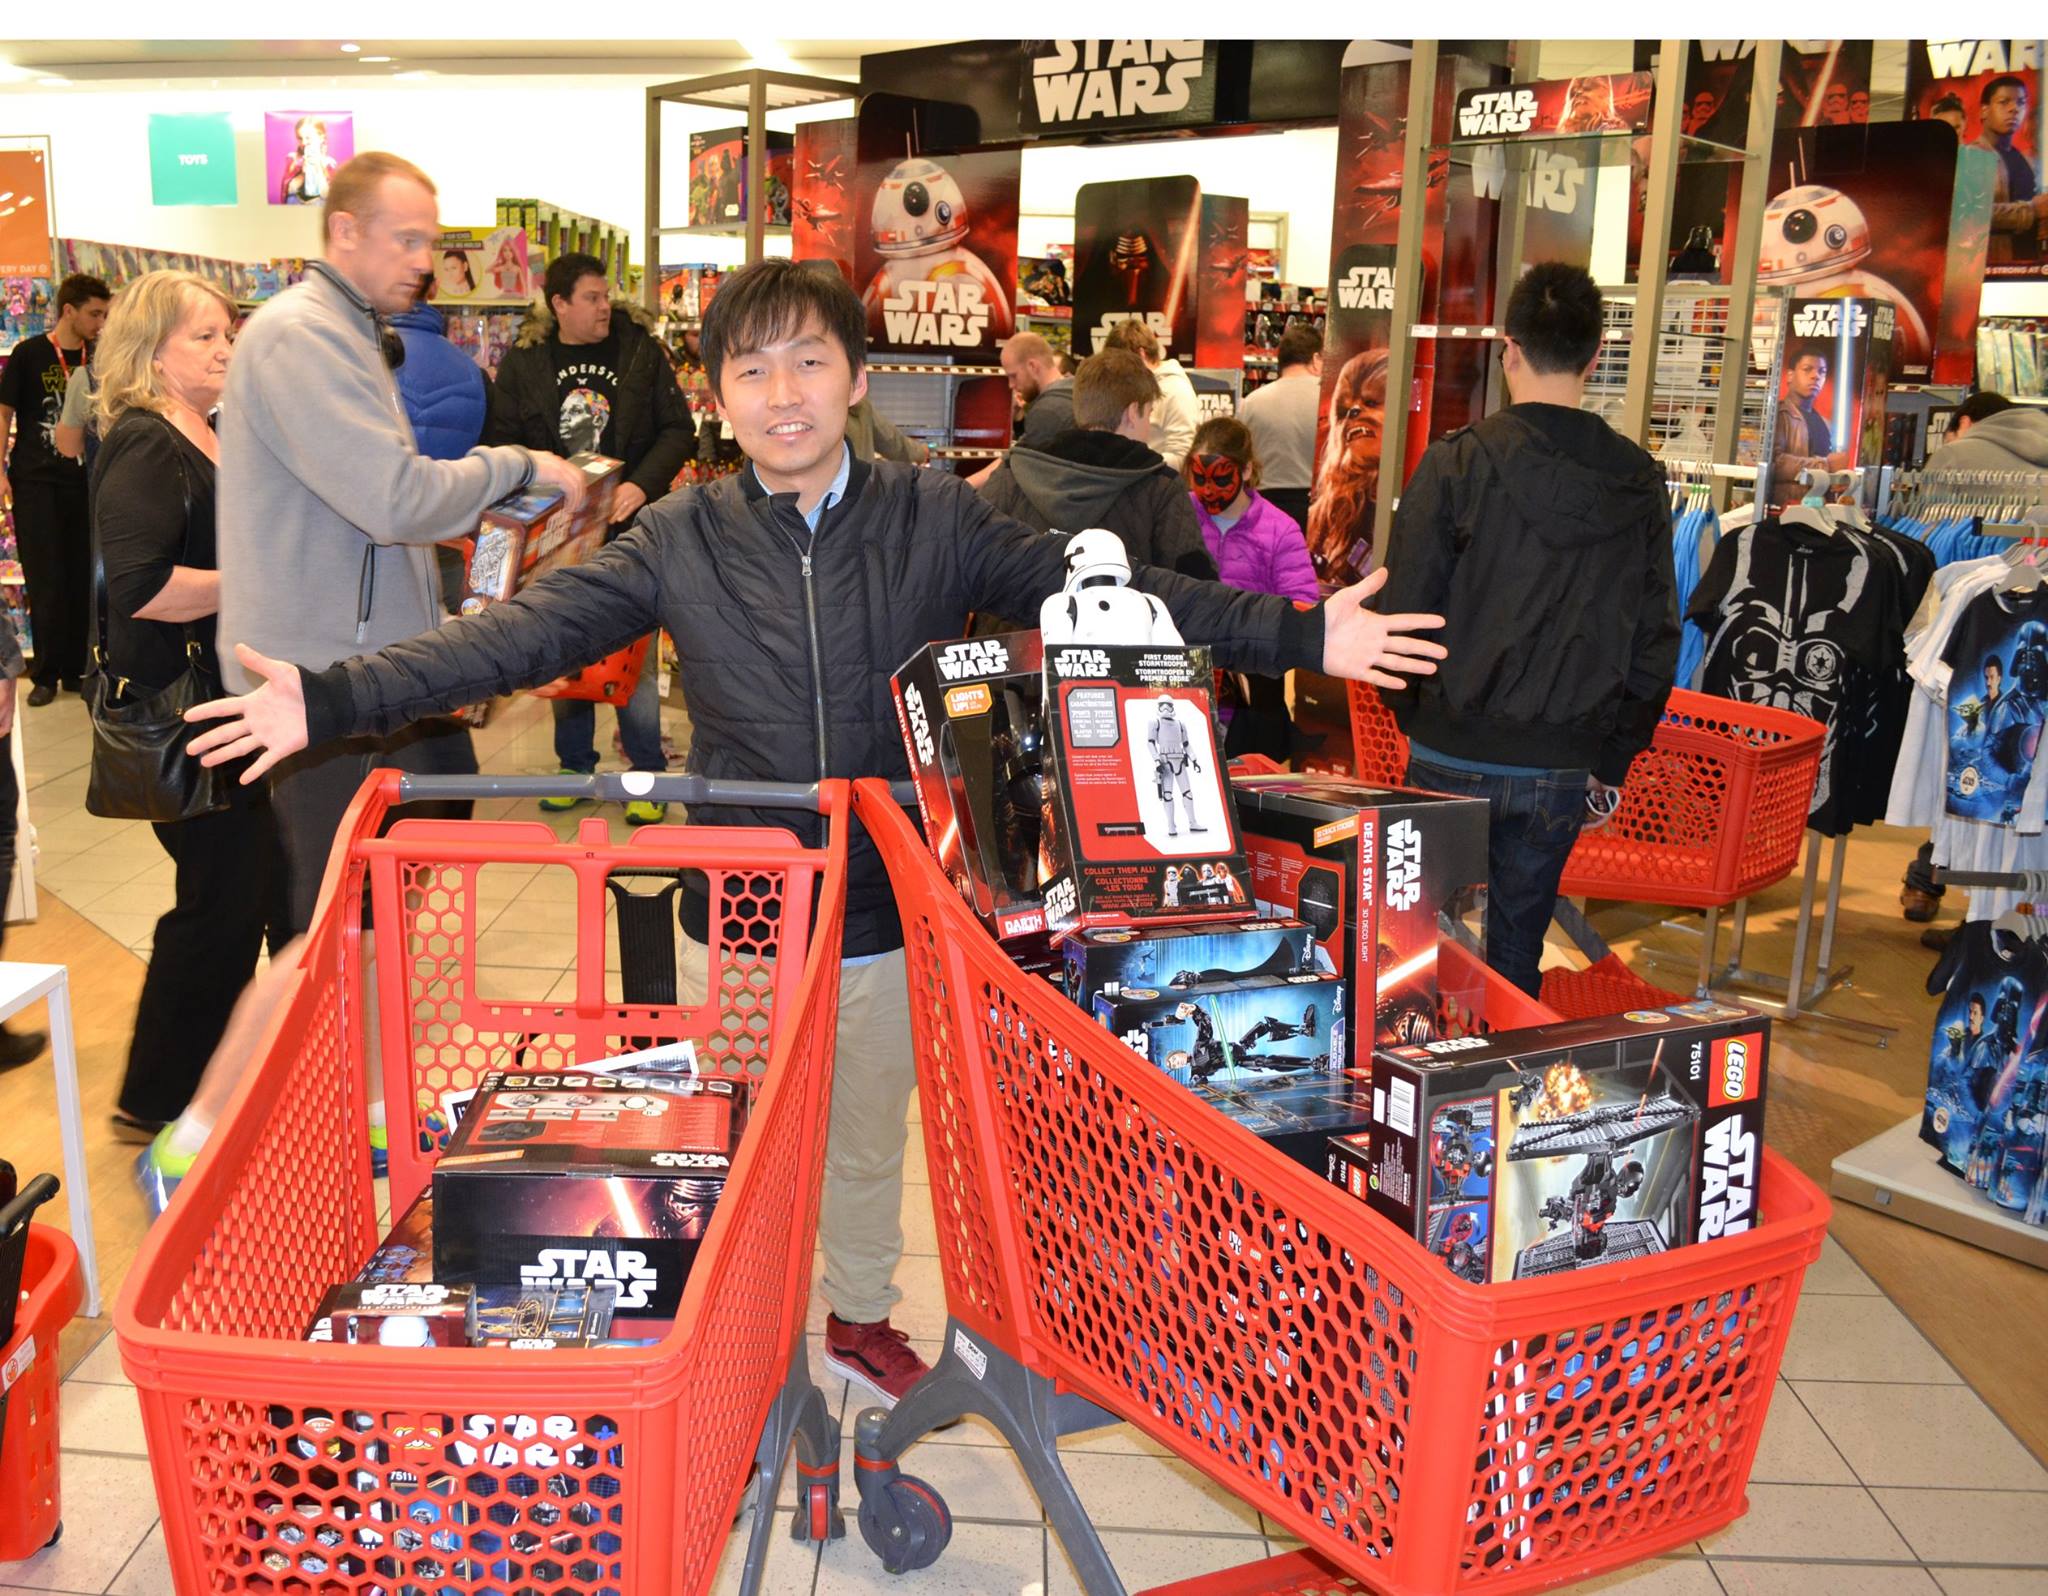 Shoppers in ANZ filling shopping carts on ForceFriday